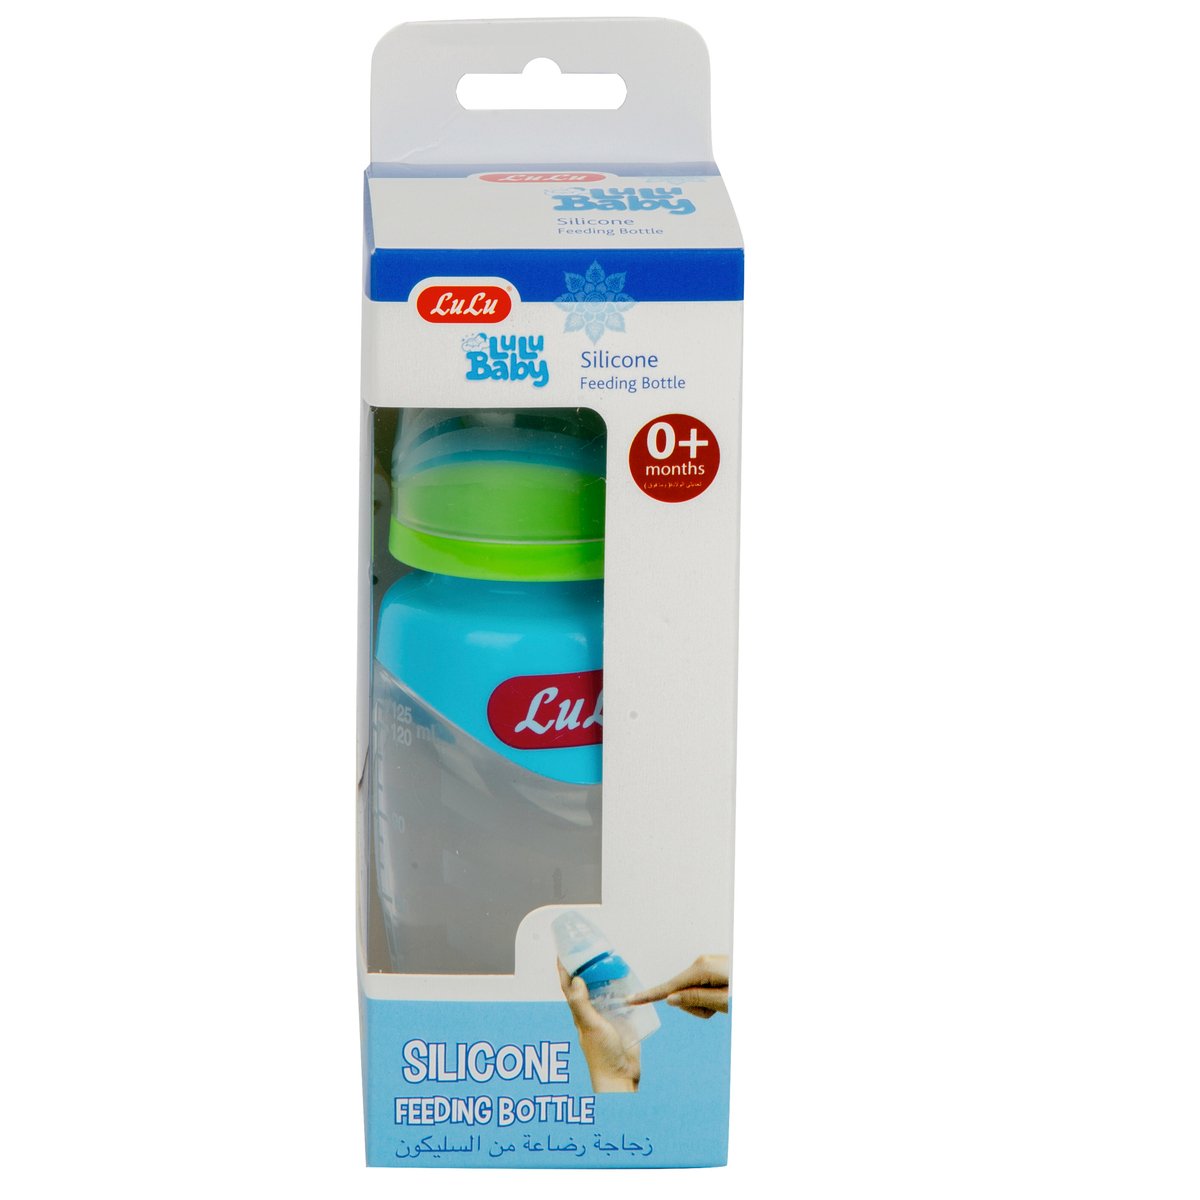 LuLu Baby Silicone Feeding Bottle For 0+ Months 1 pc